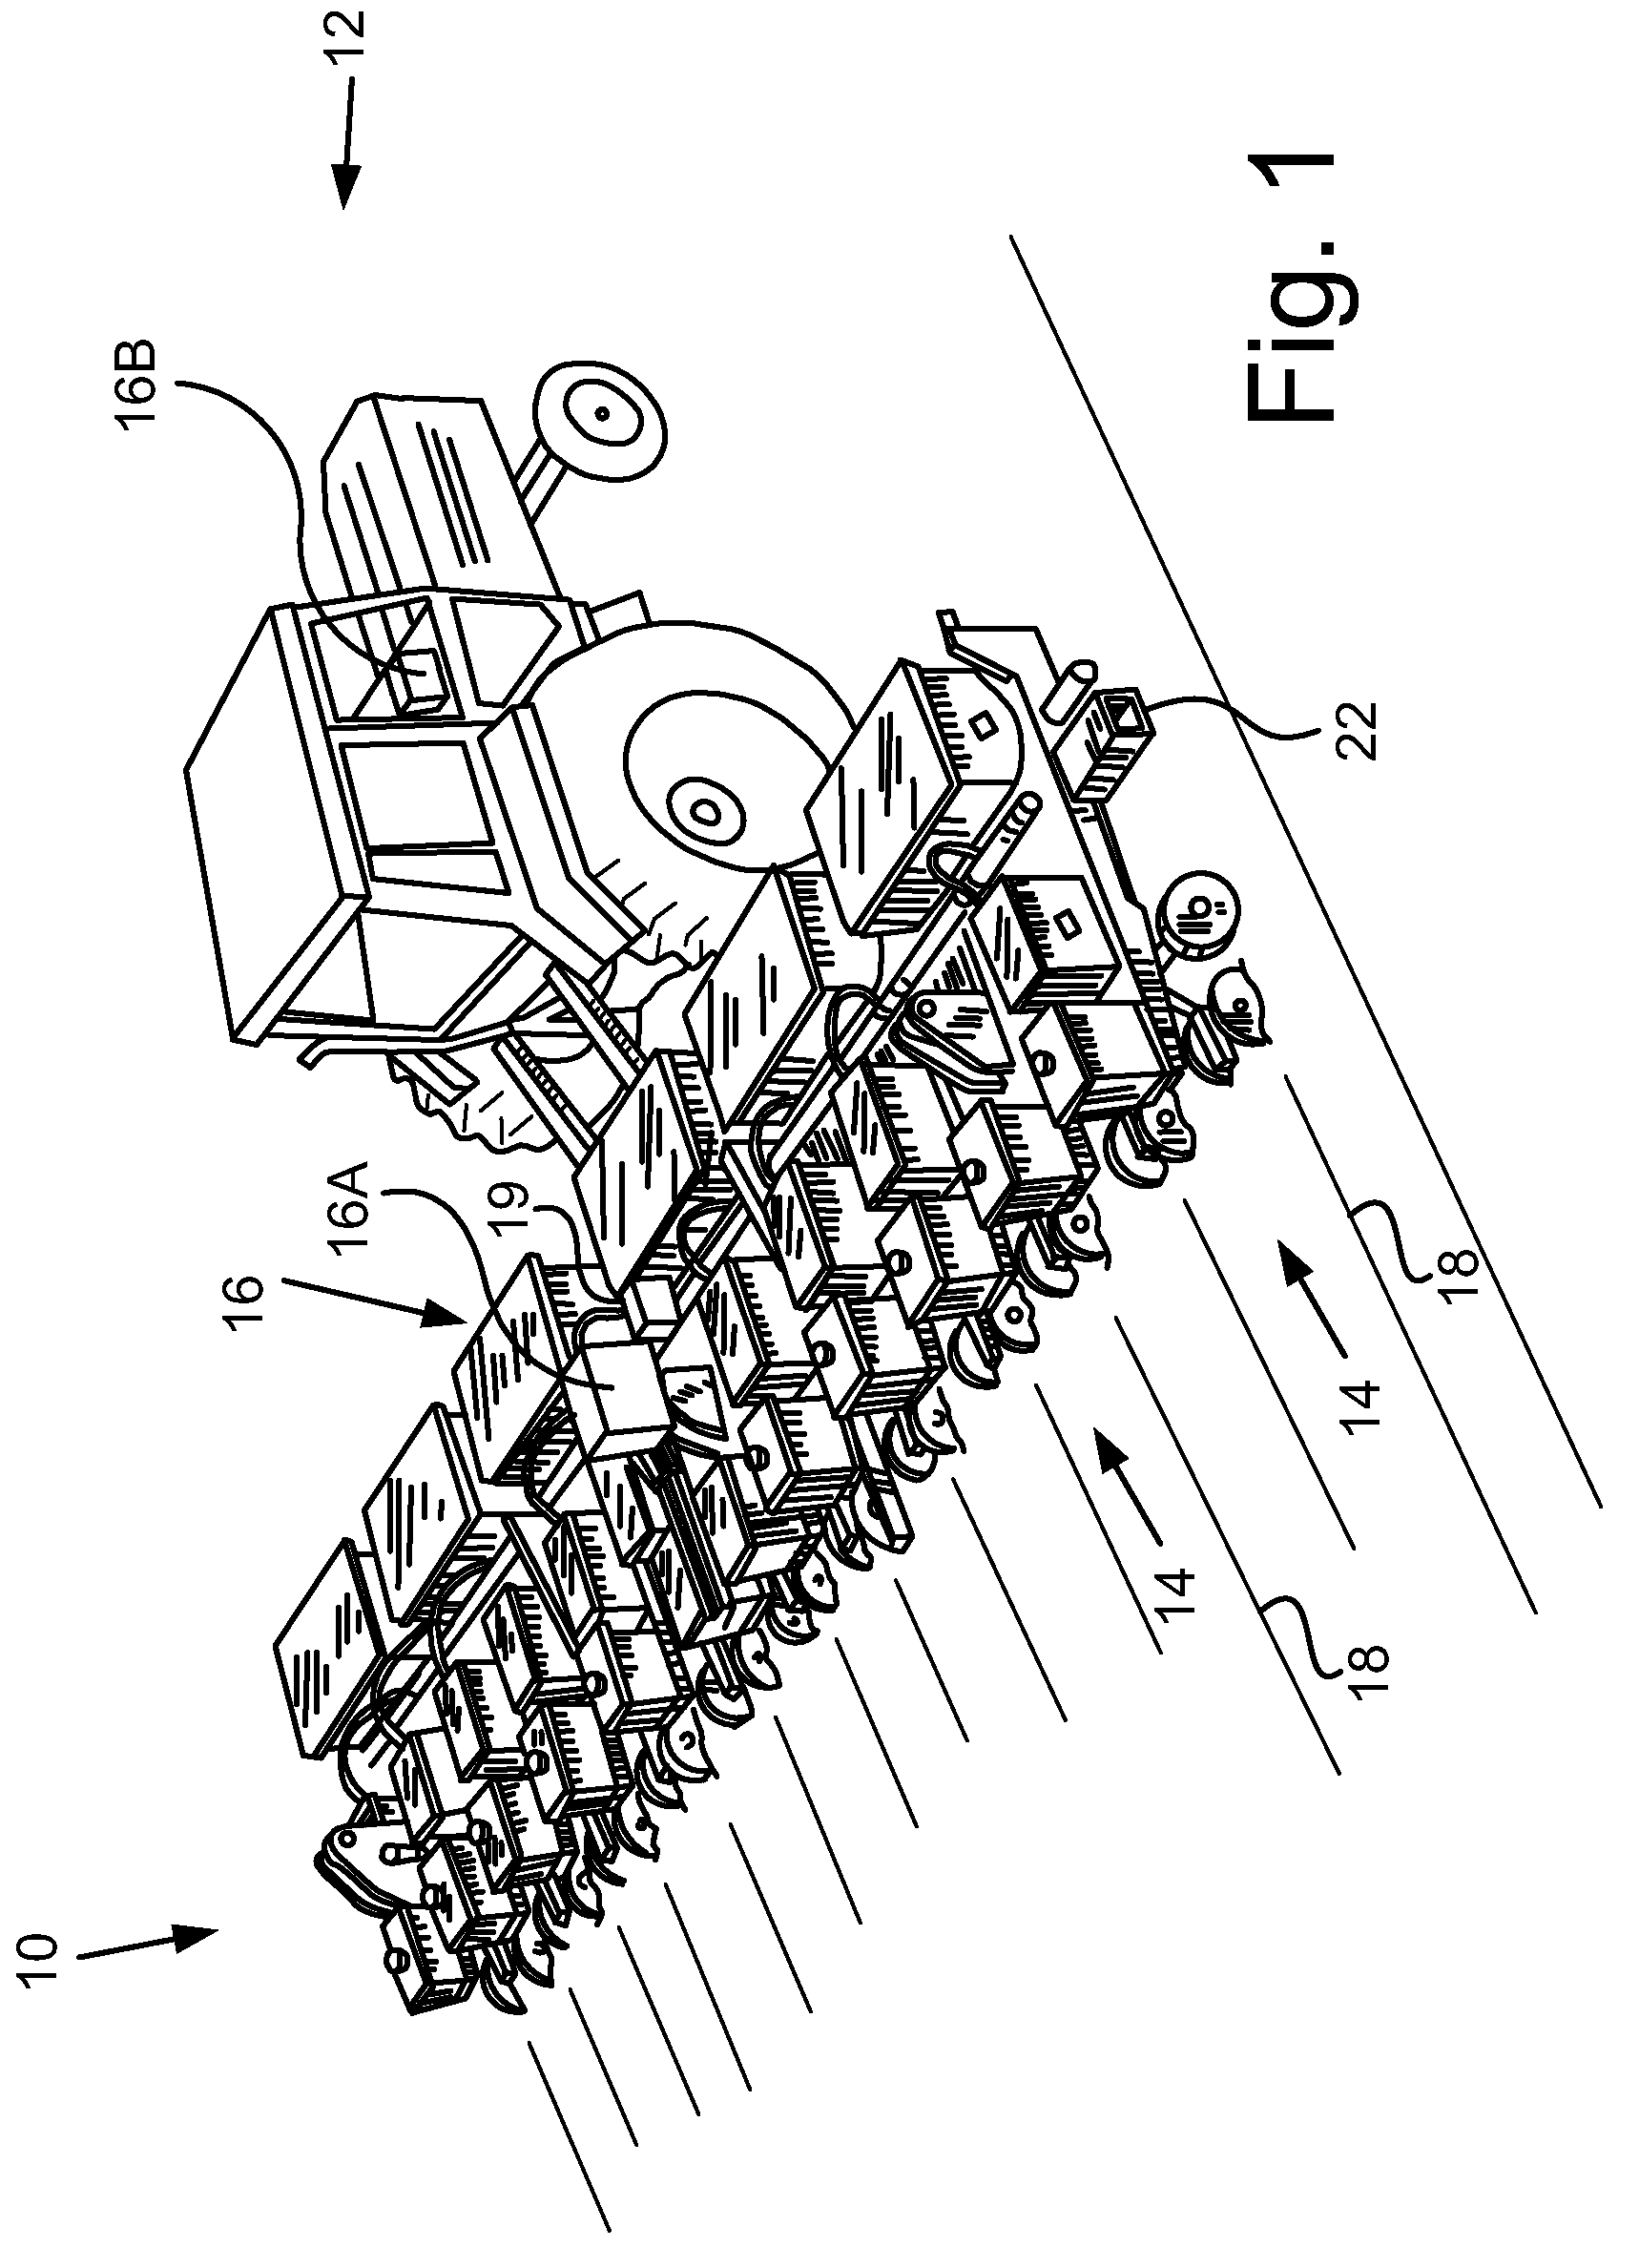 In-ground seed spacing monitoring system for use in an agricultural seeder